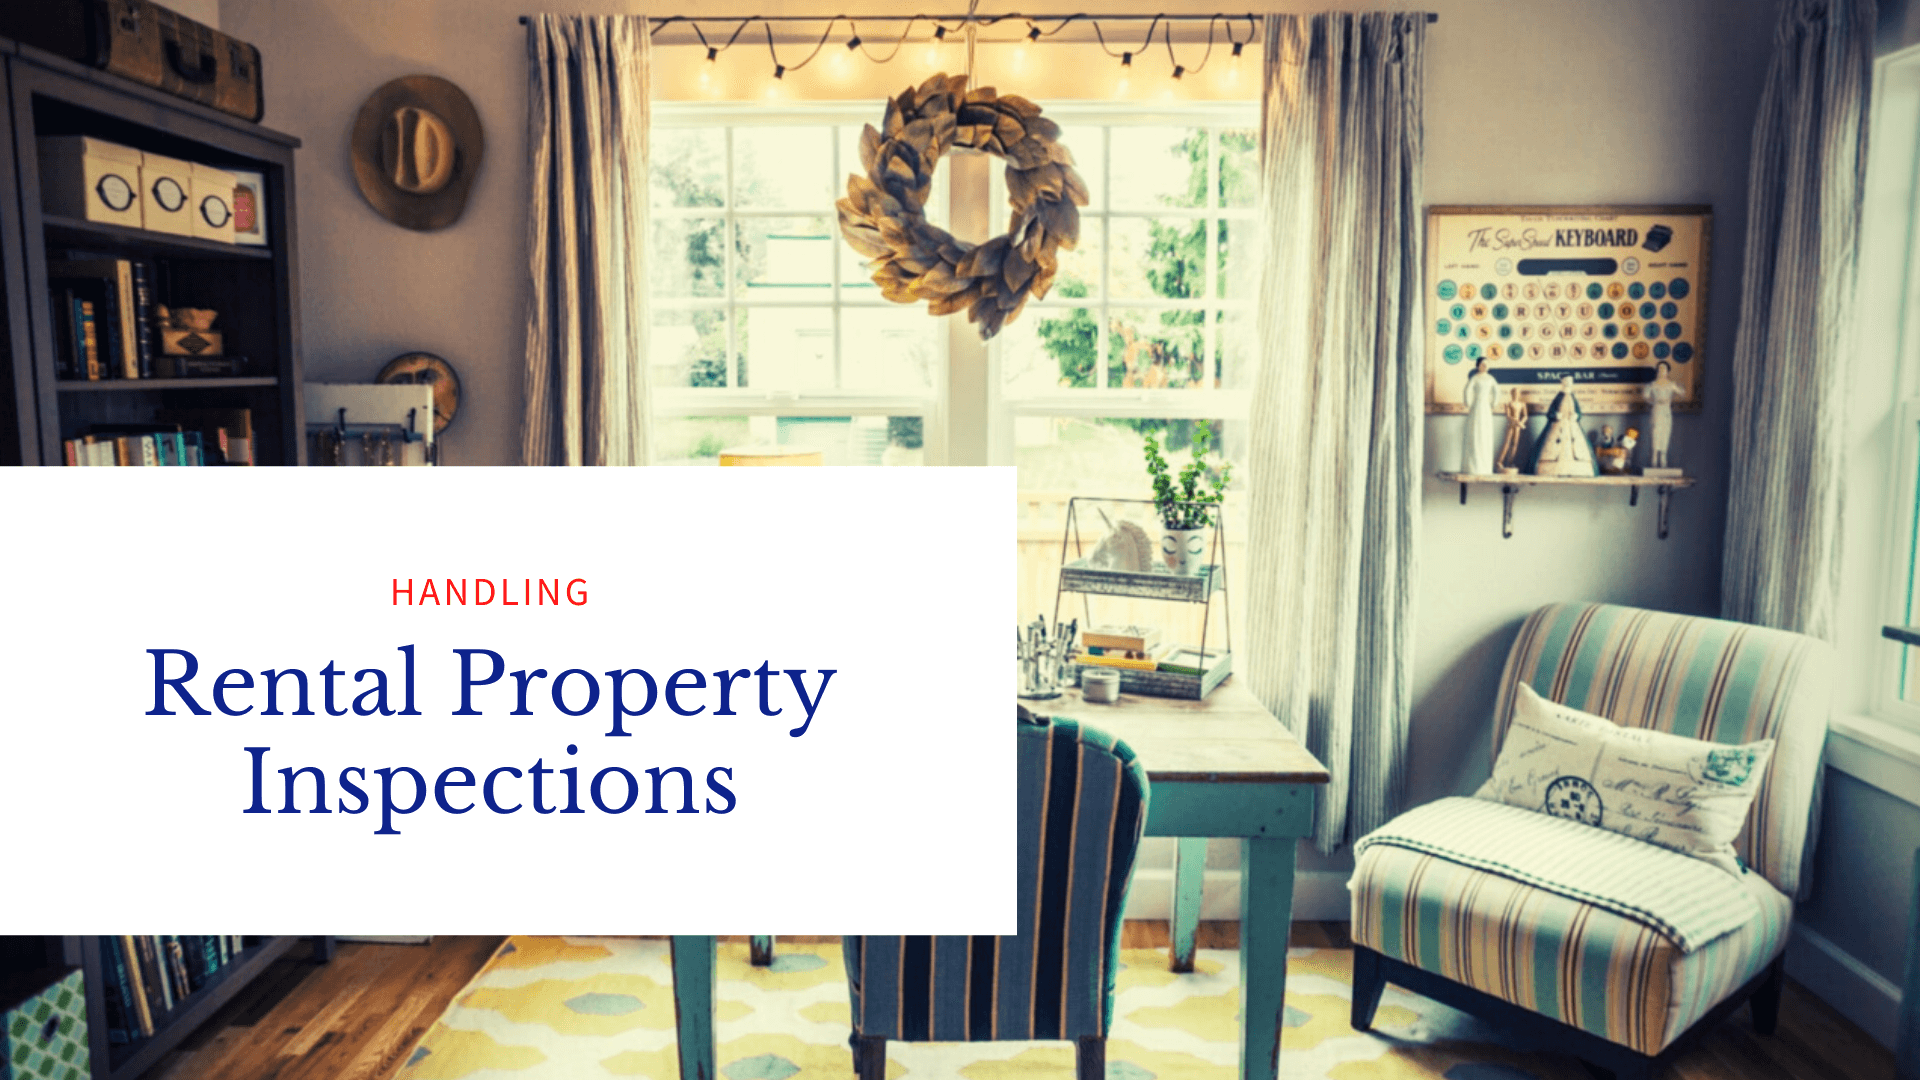 Handling Rental Property Inspections the Right Way | Irvine Property Management Best Practice